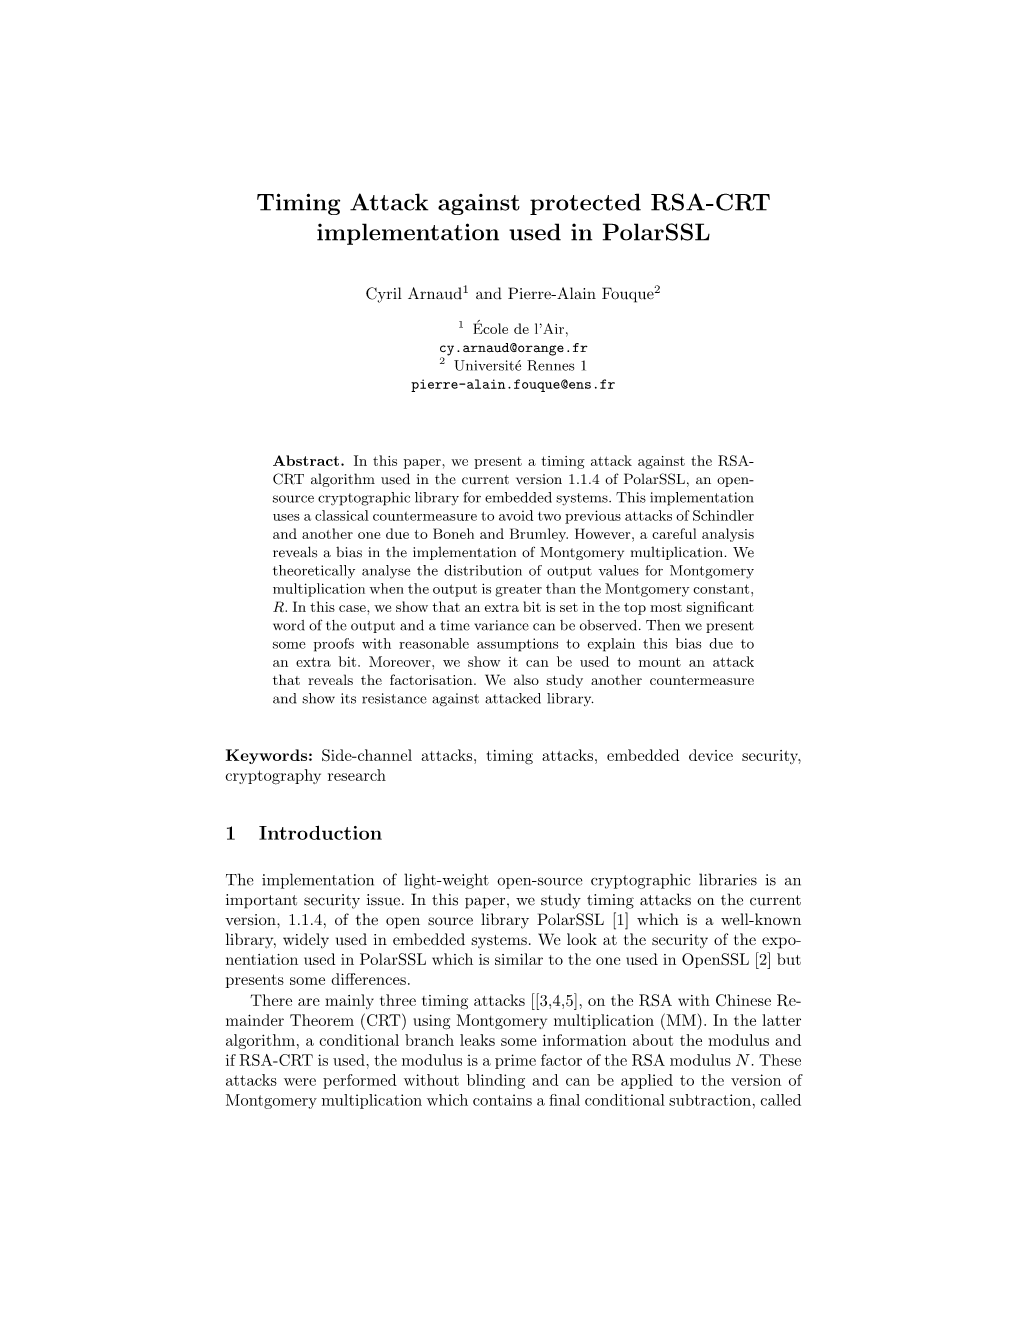 Timing Attack Against Protected RSA-CRT Implementation Used in Polarssl